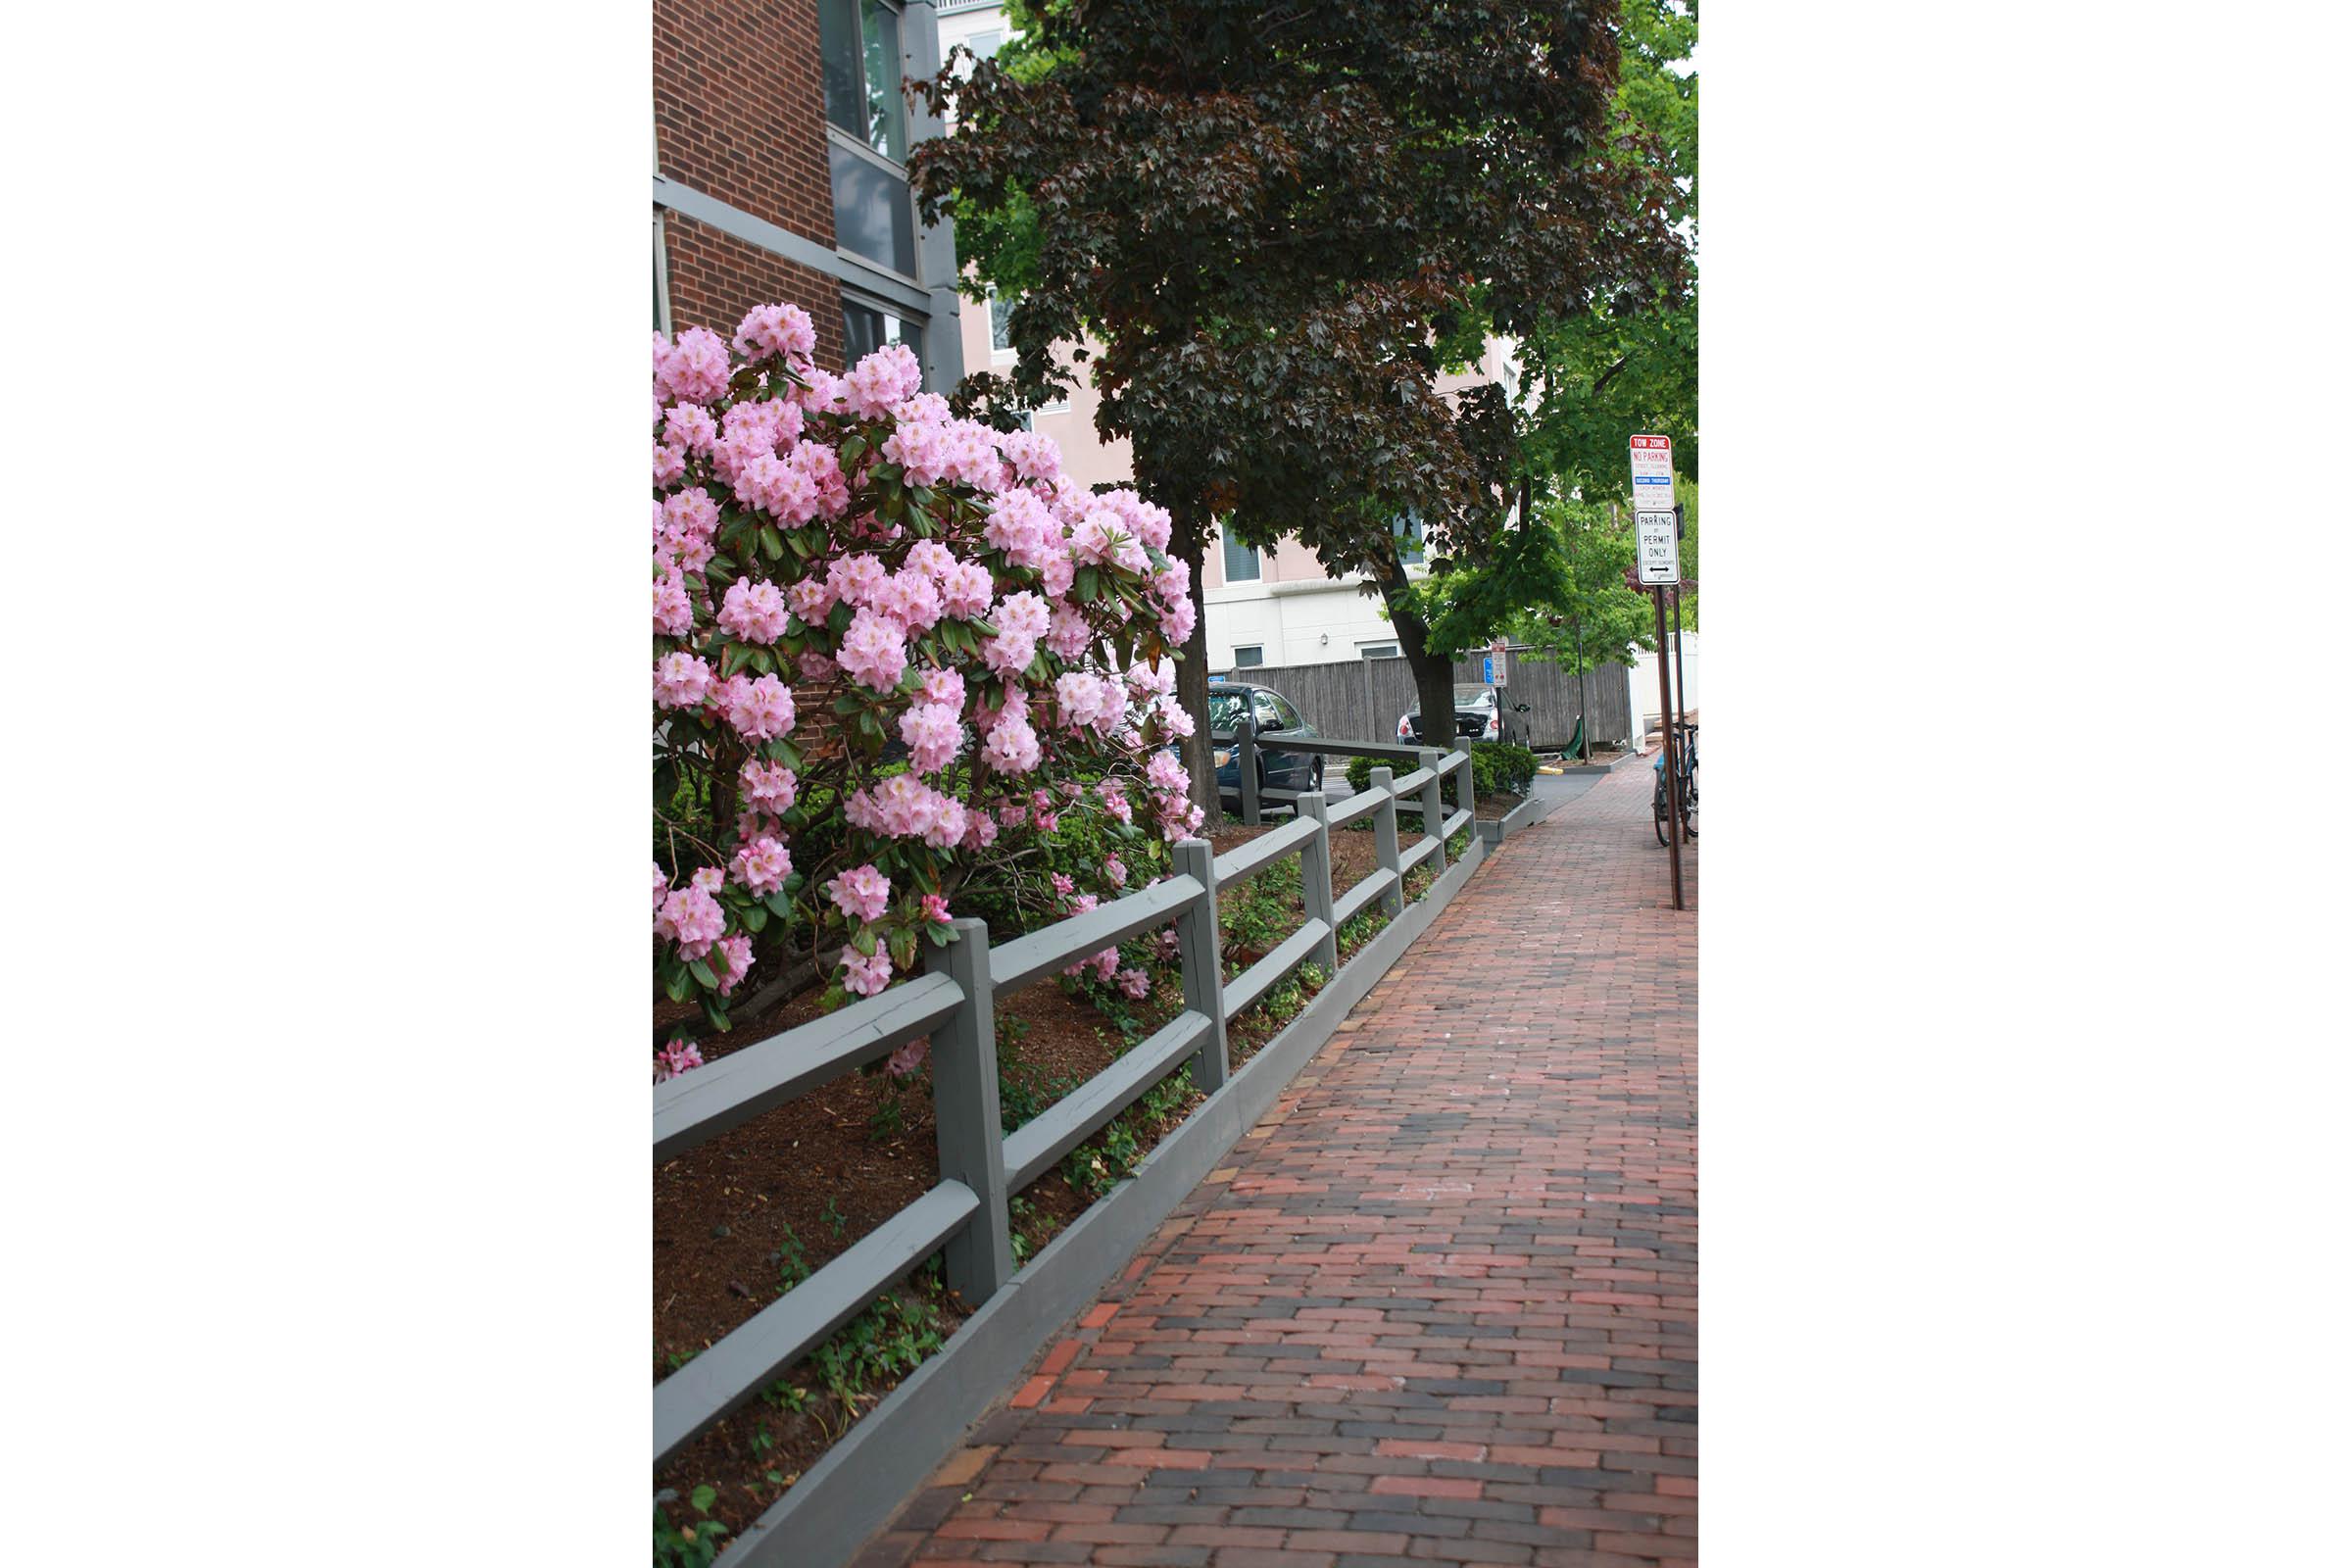 a close up of a flower garden in front of a brick building